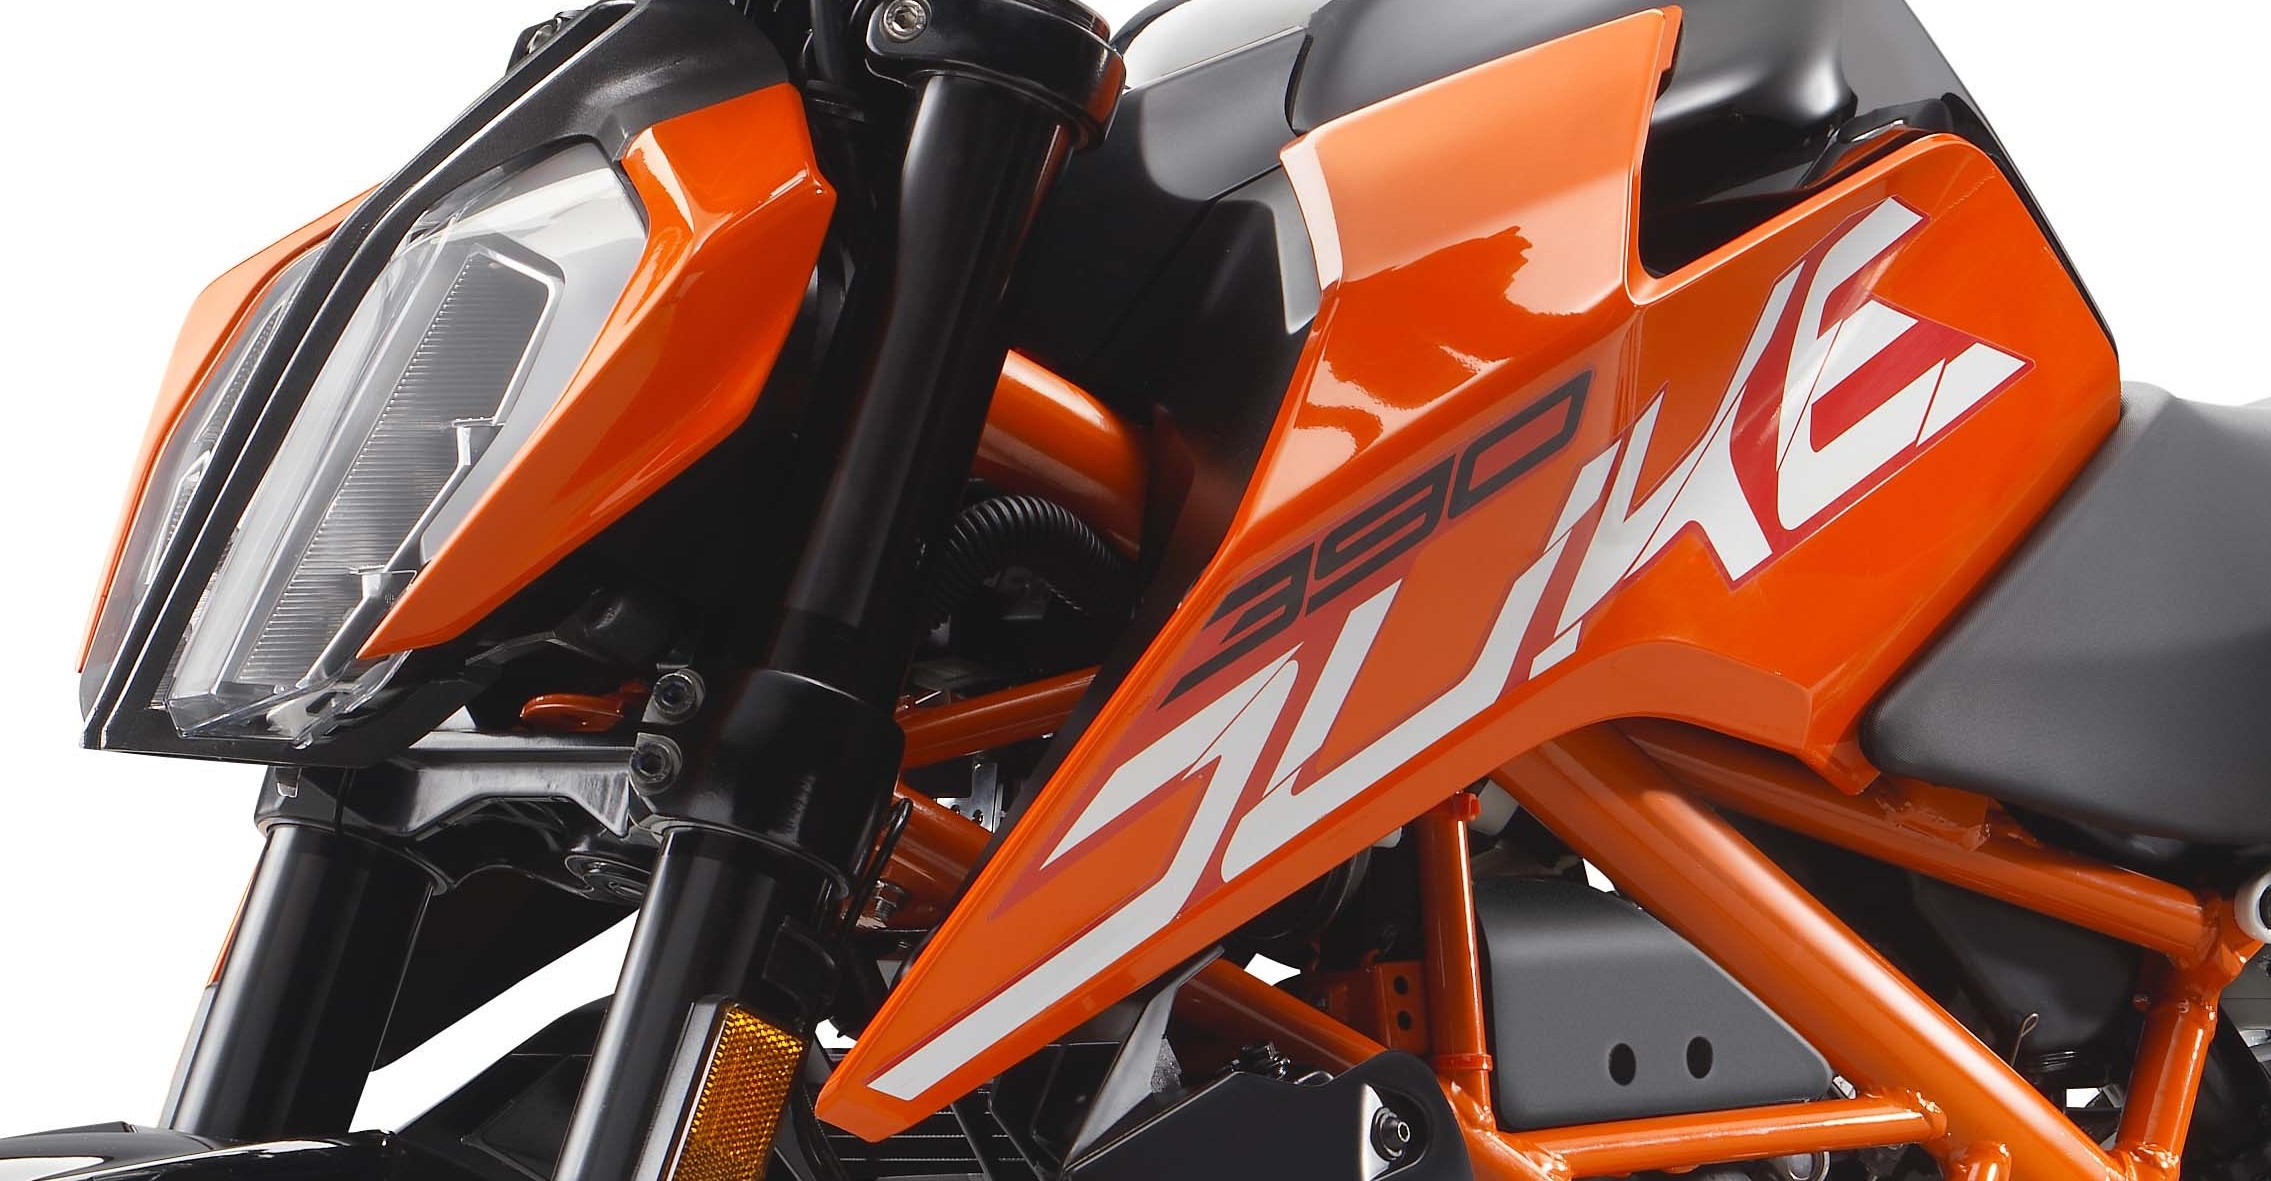 5 Reasons Why You Should Wait for the 2017 KTM 390 Duke